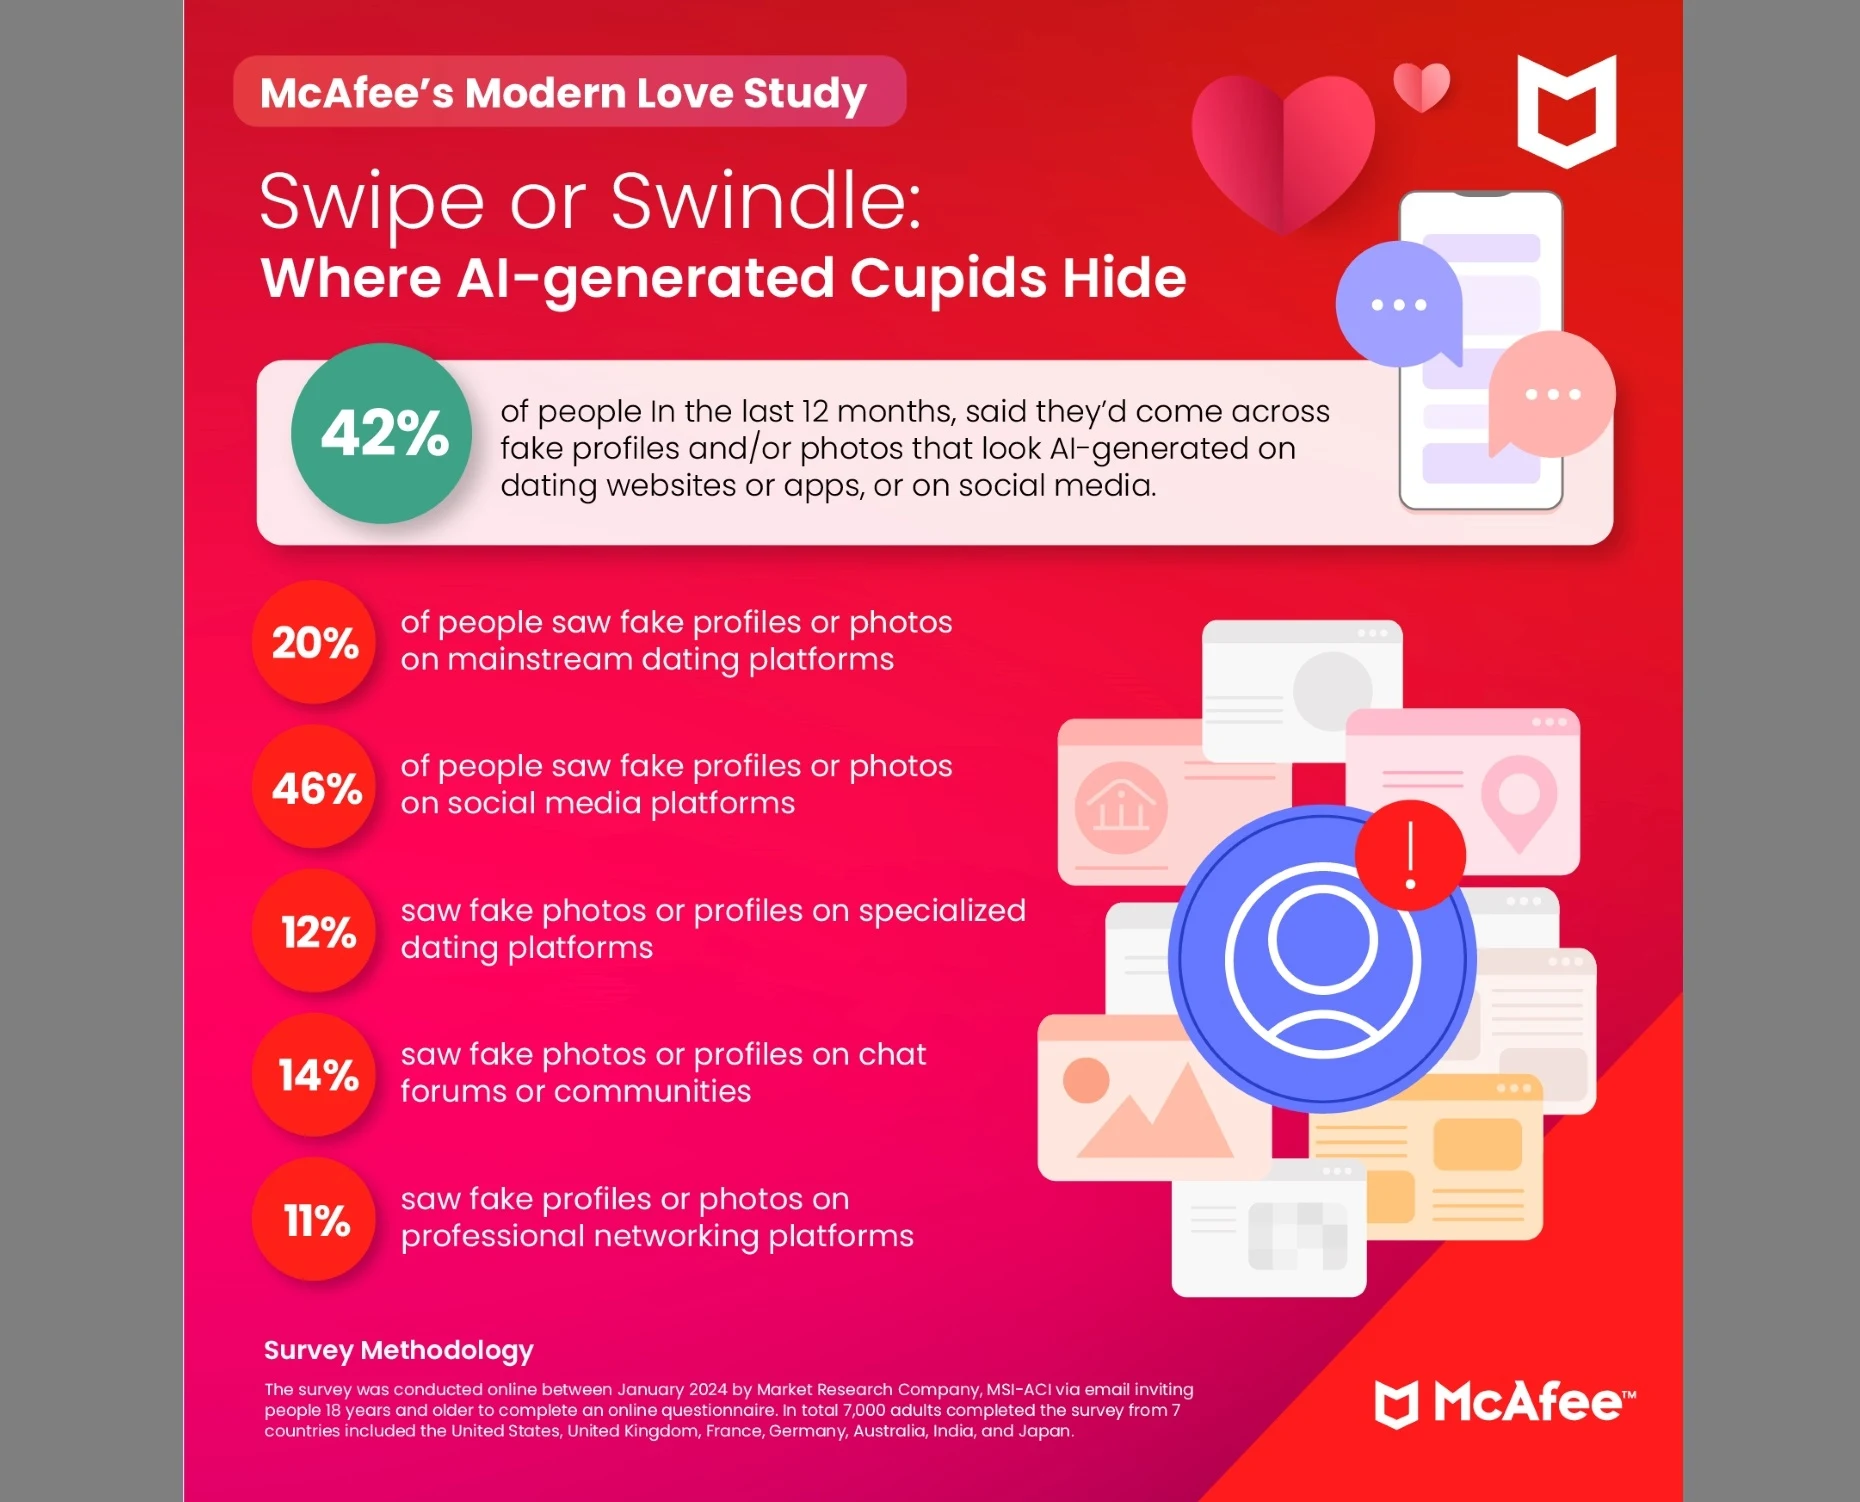 Majority wary: 64% would distrust AI-created dating profile images, warns McAfee's Steve Grobman of potential scams.